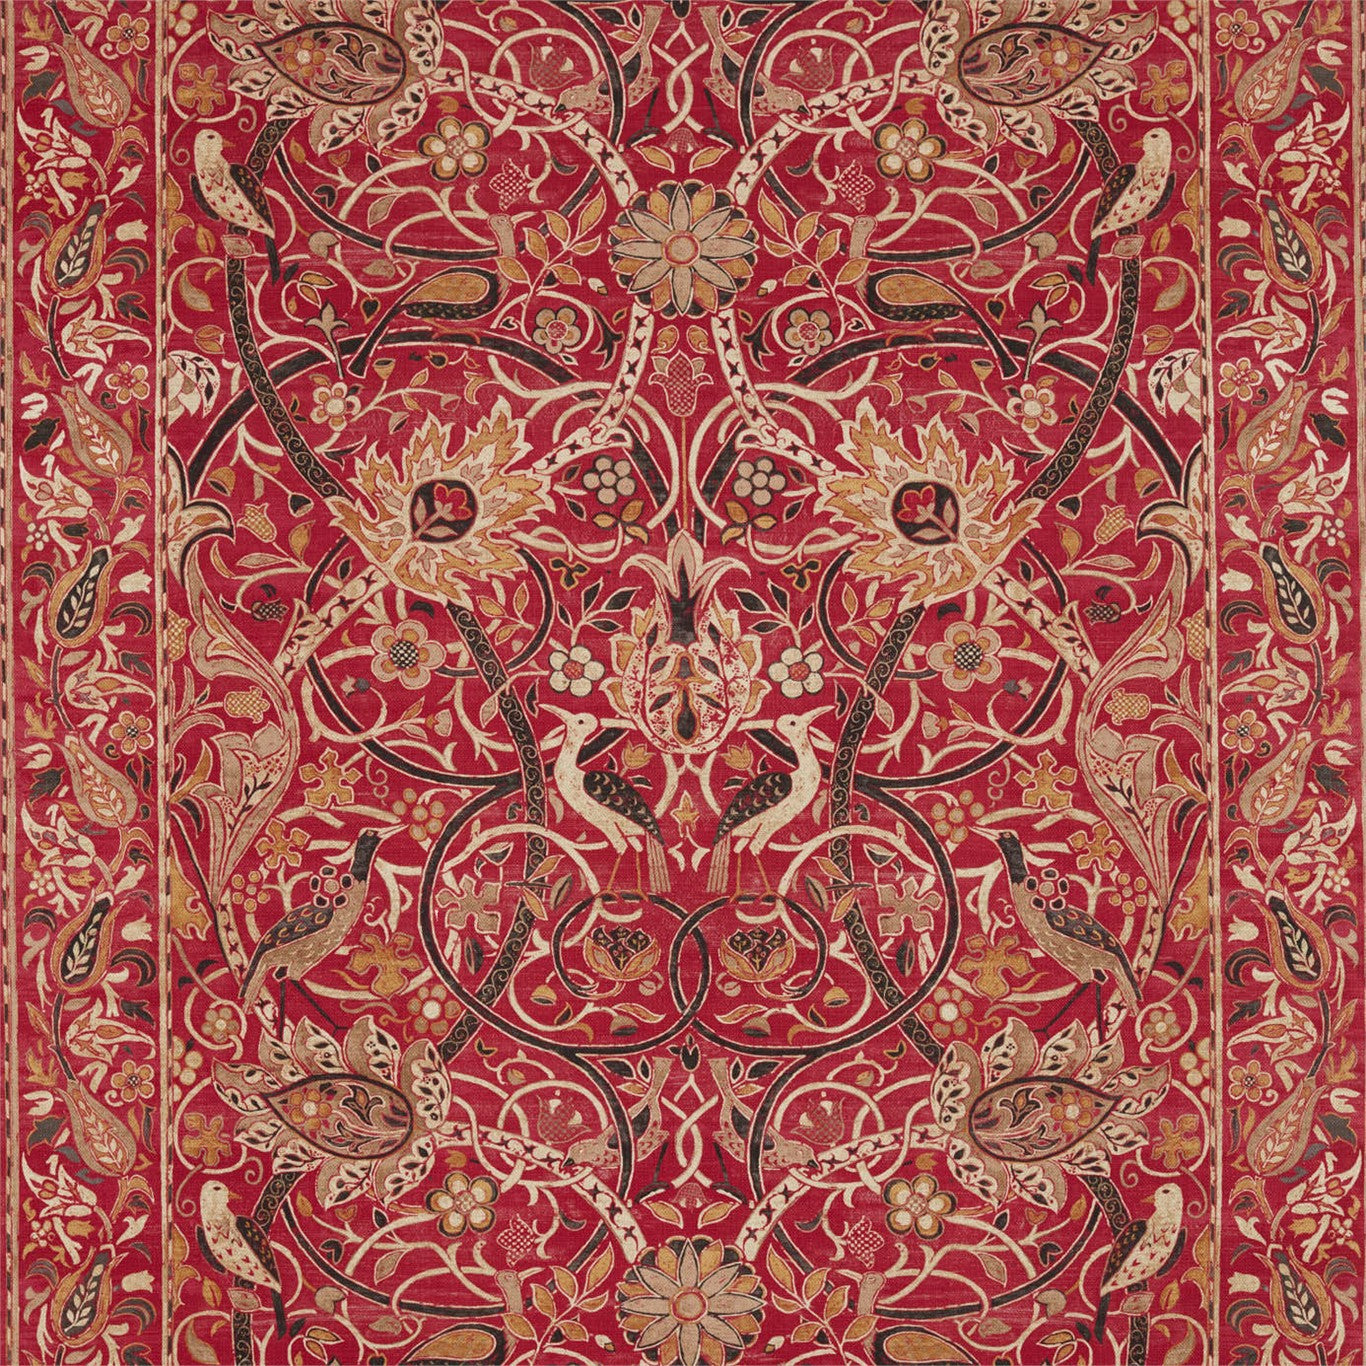 Bullerswood Fabric by Morris & Co. - DMA4226392 - Paprika/Gold